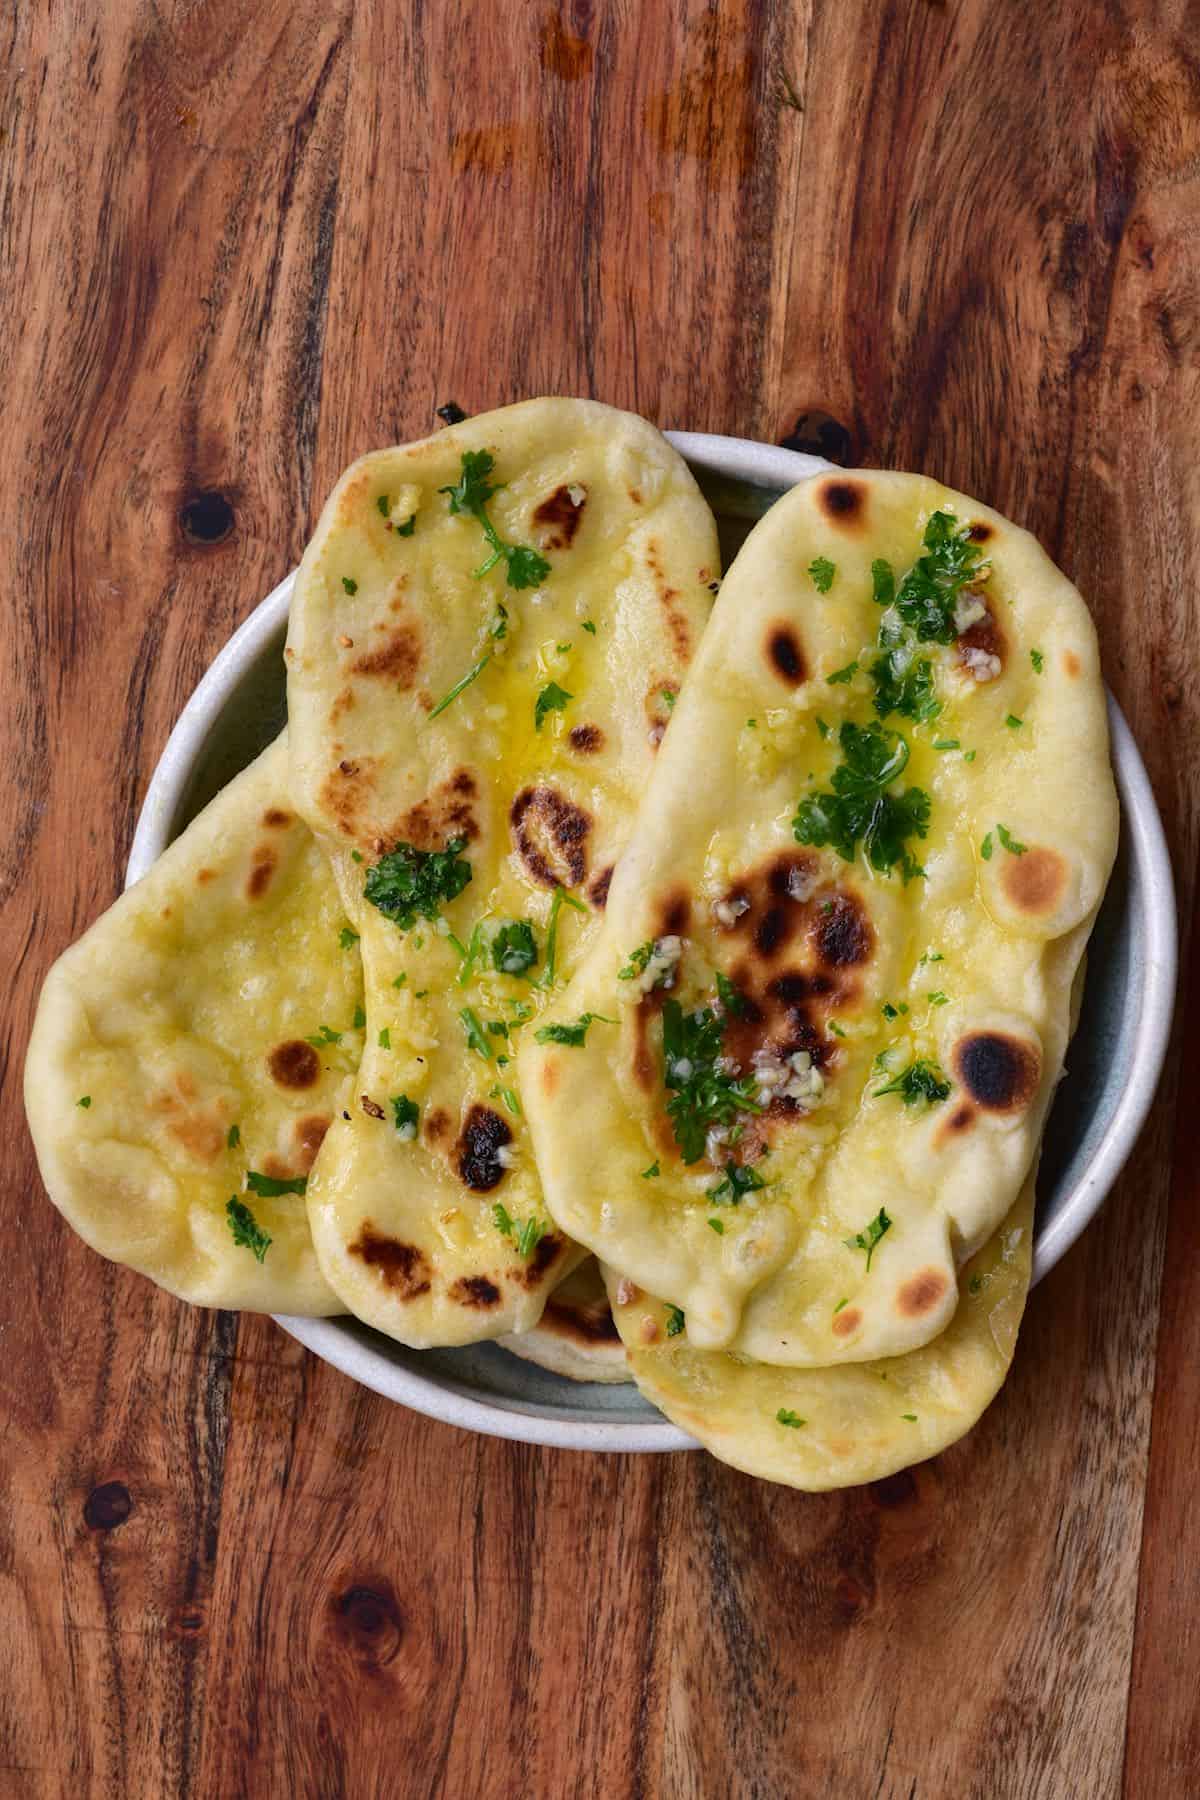 A few naan breads in a bowl